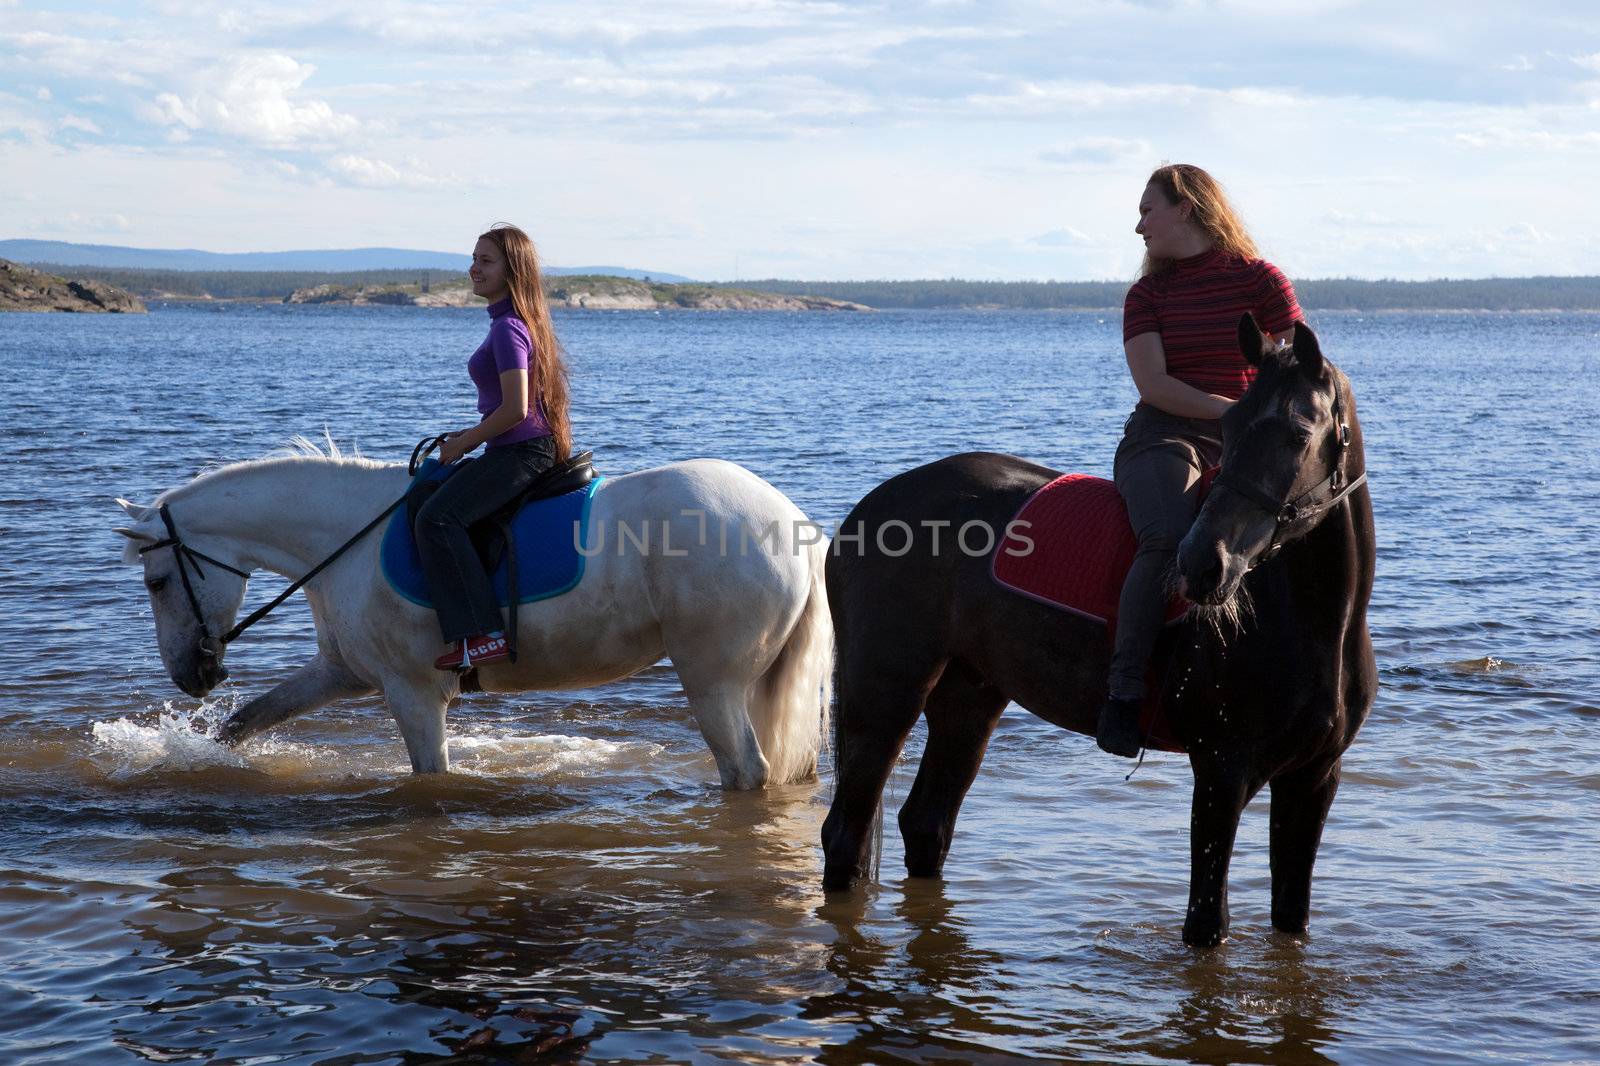 The girls led the horses to water. Summer landscape.